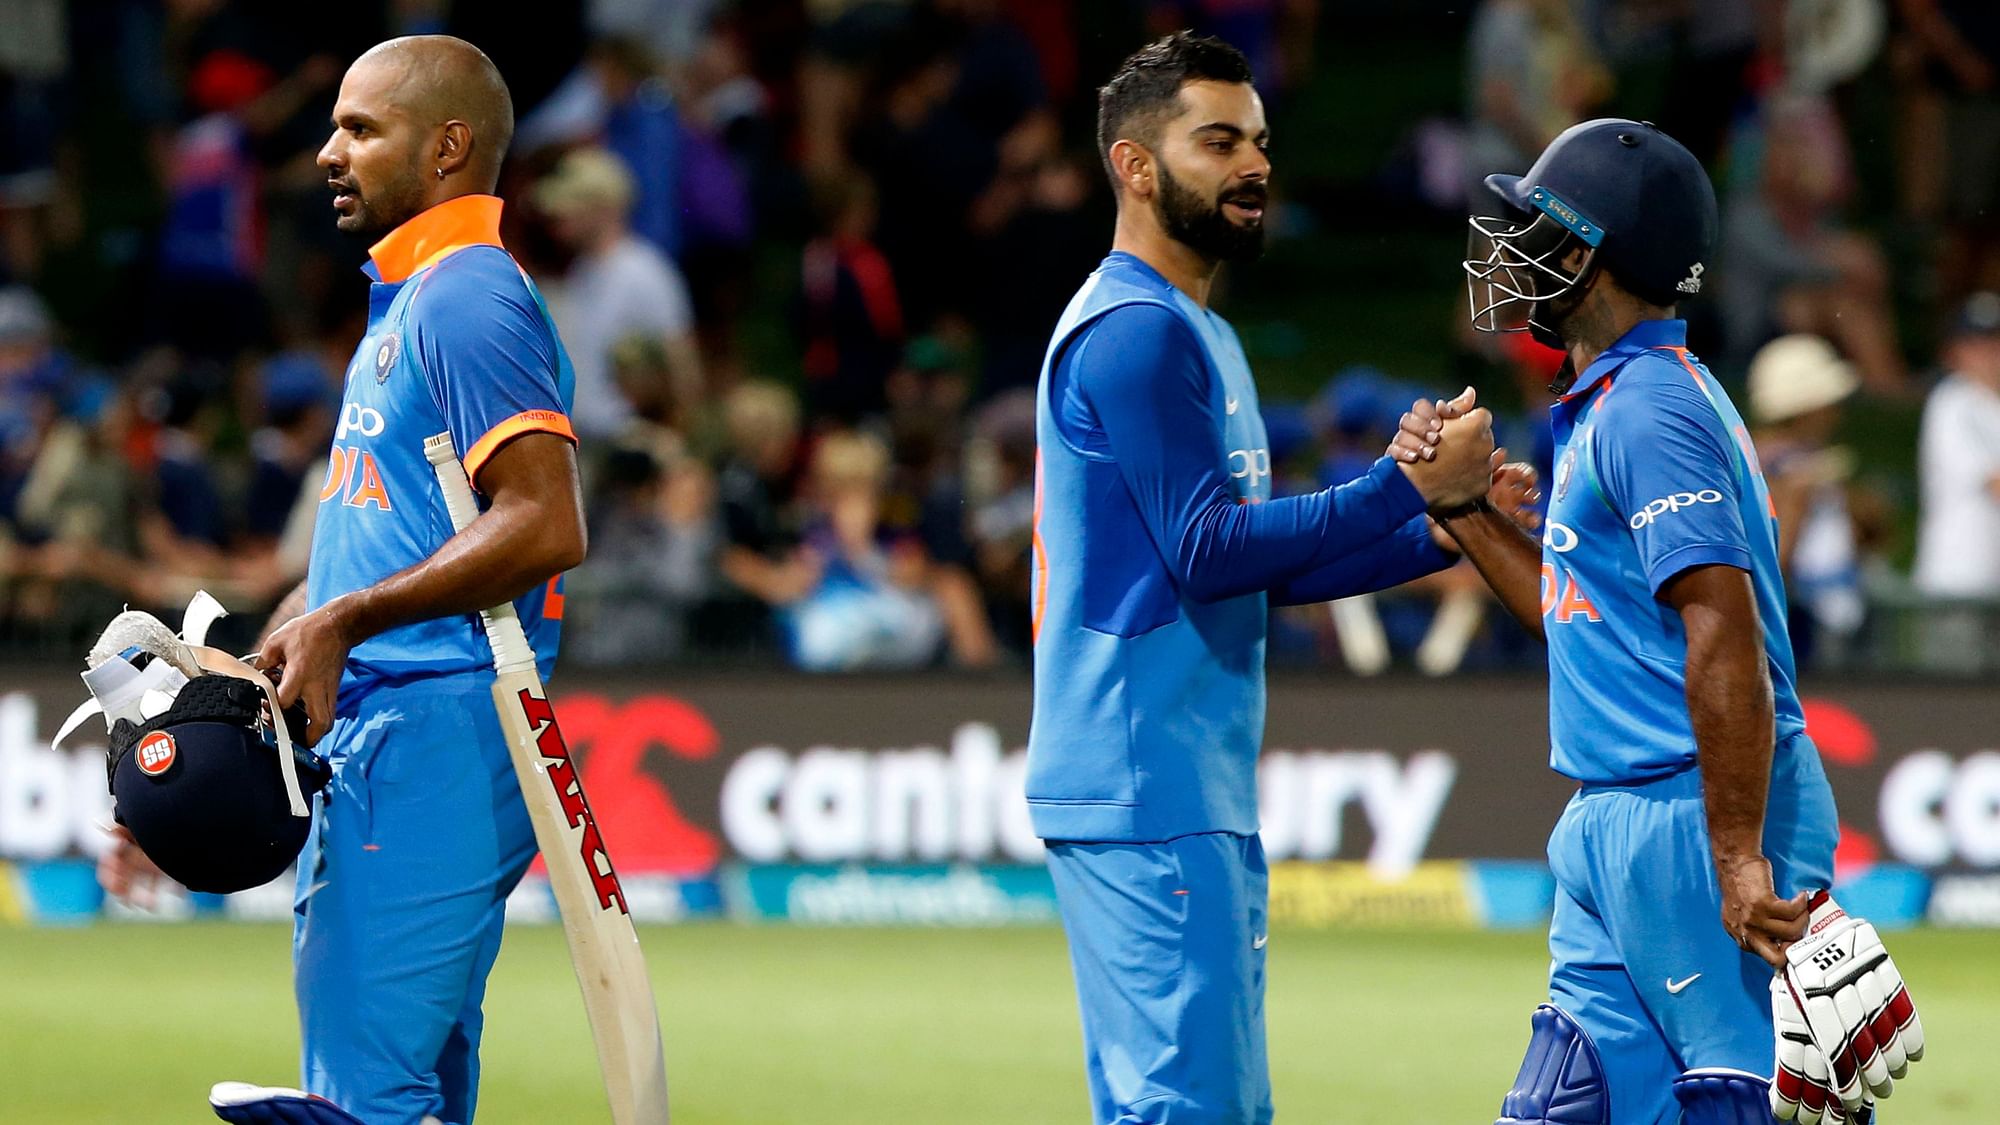 India walk off the field celebrating an 8-wicket win in the opening ODI of their five-match series in New Zealand at Napier.